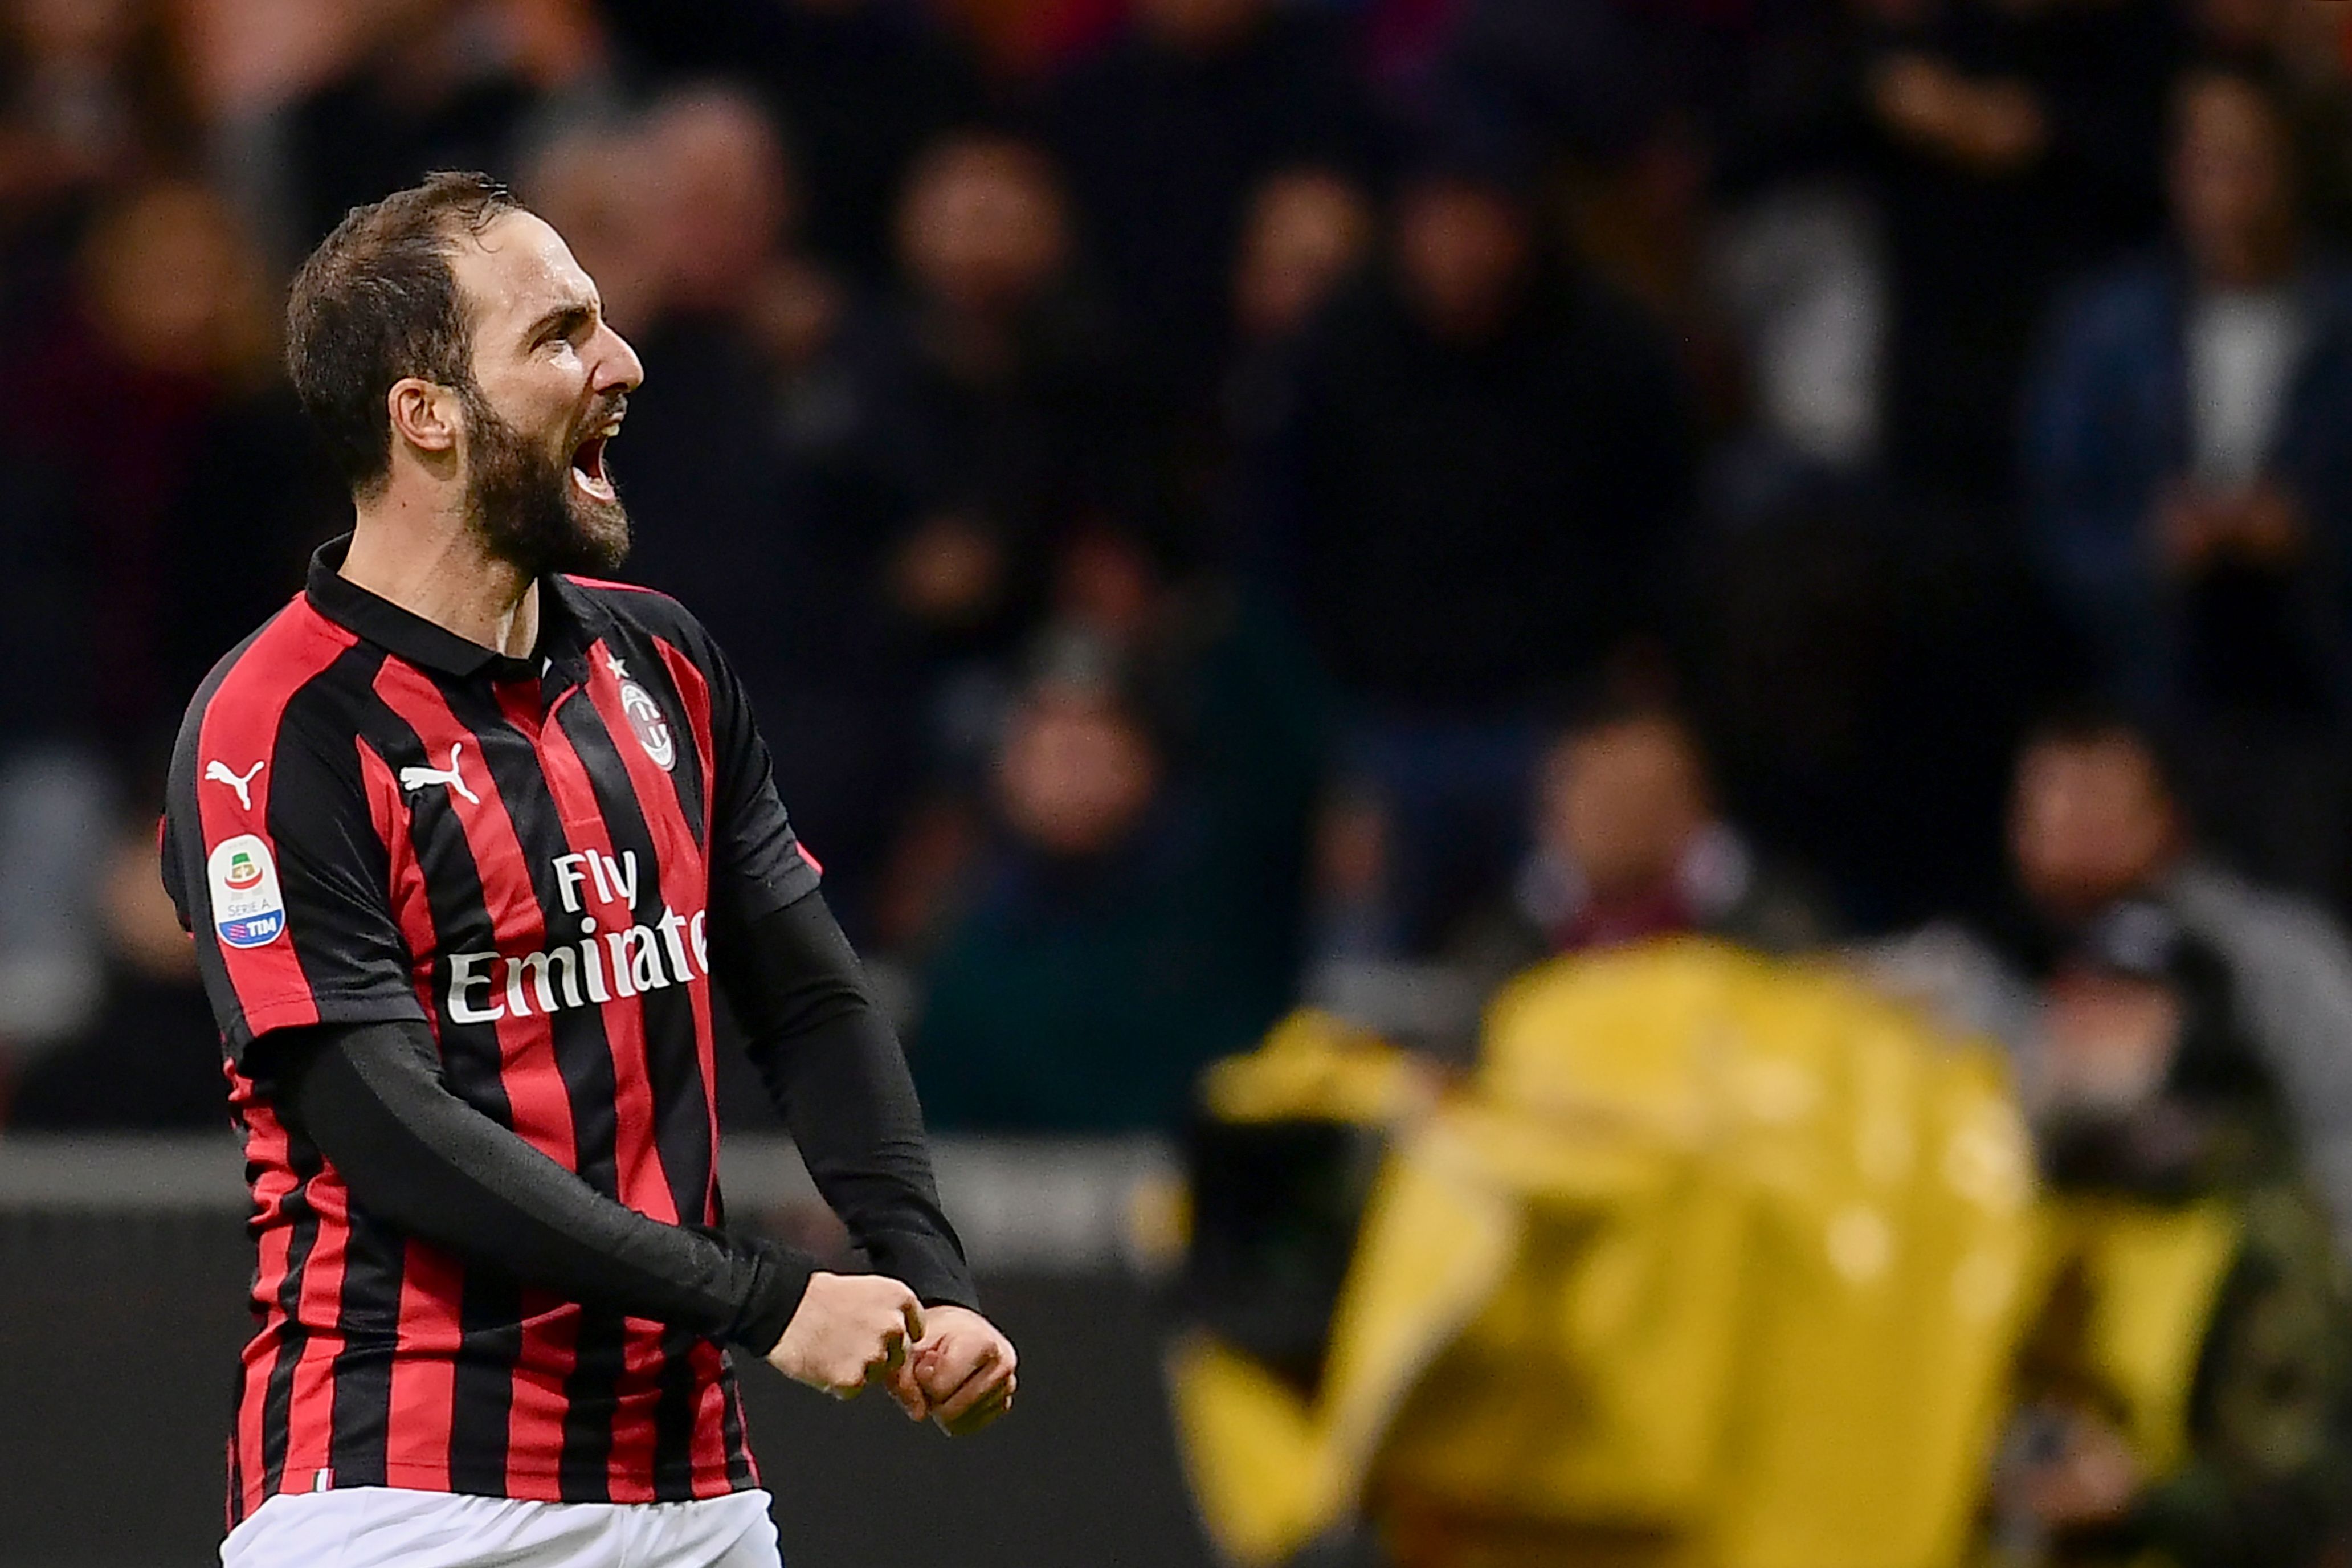 AC Milan's Argentinian forward Gonzalo Higuain celebrates after scoring during the Italian Serie A football match AC Milan vs Sampdoria at the 'Giuseppe Meazza Stadium' in Milan, on October 28, 2018. (Photo by MARCO BERTORELLO / AFP) (Photo credit should read MARCO BERTORELLO/AFP/Getty Images)